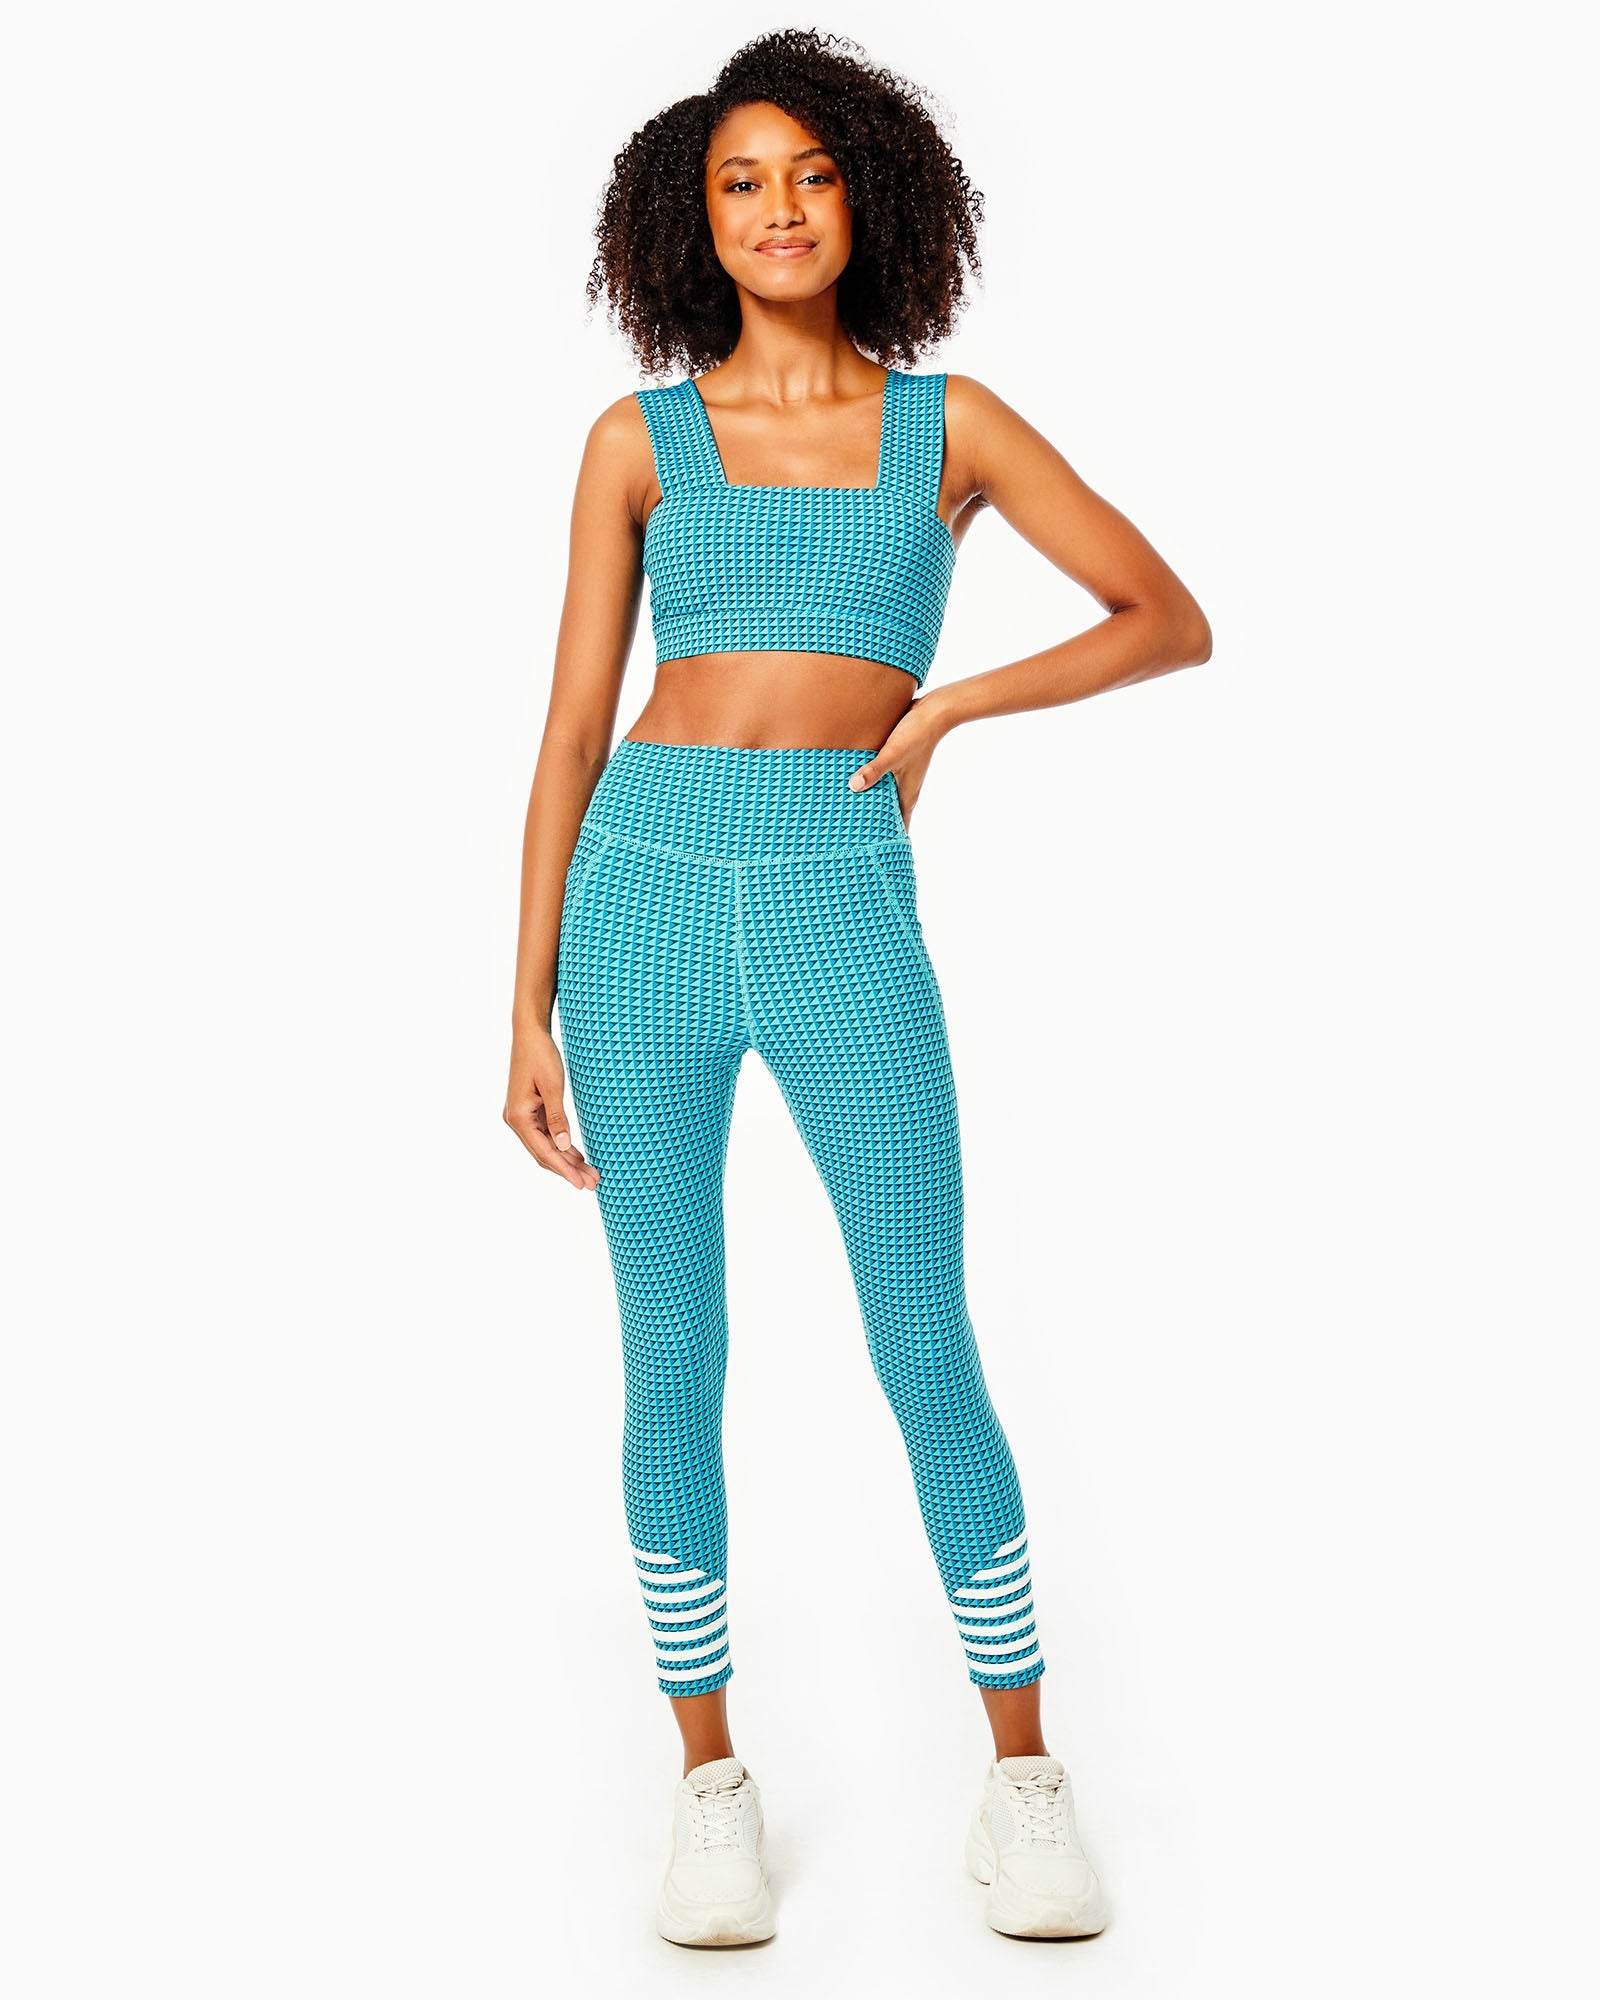 ADDISON BAY Moravian Sports Bra in Totally Teal Geo